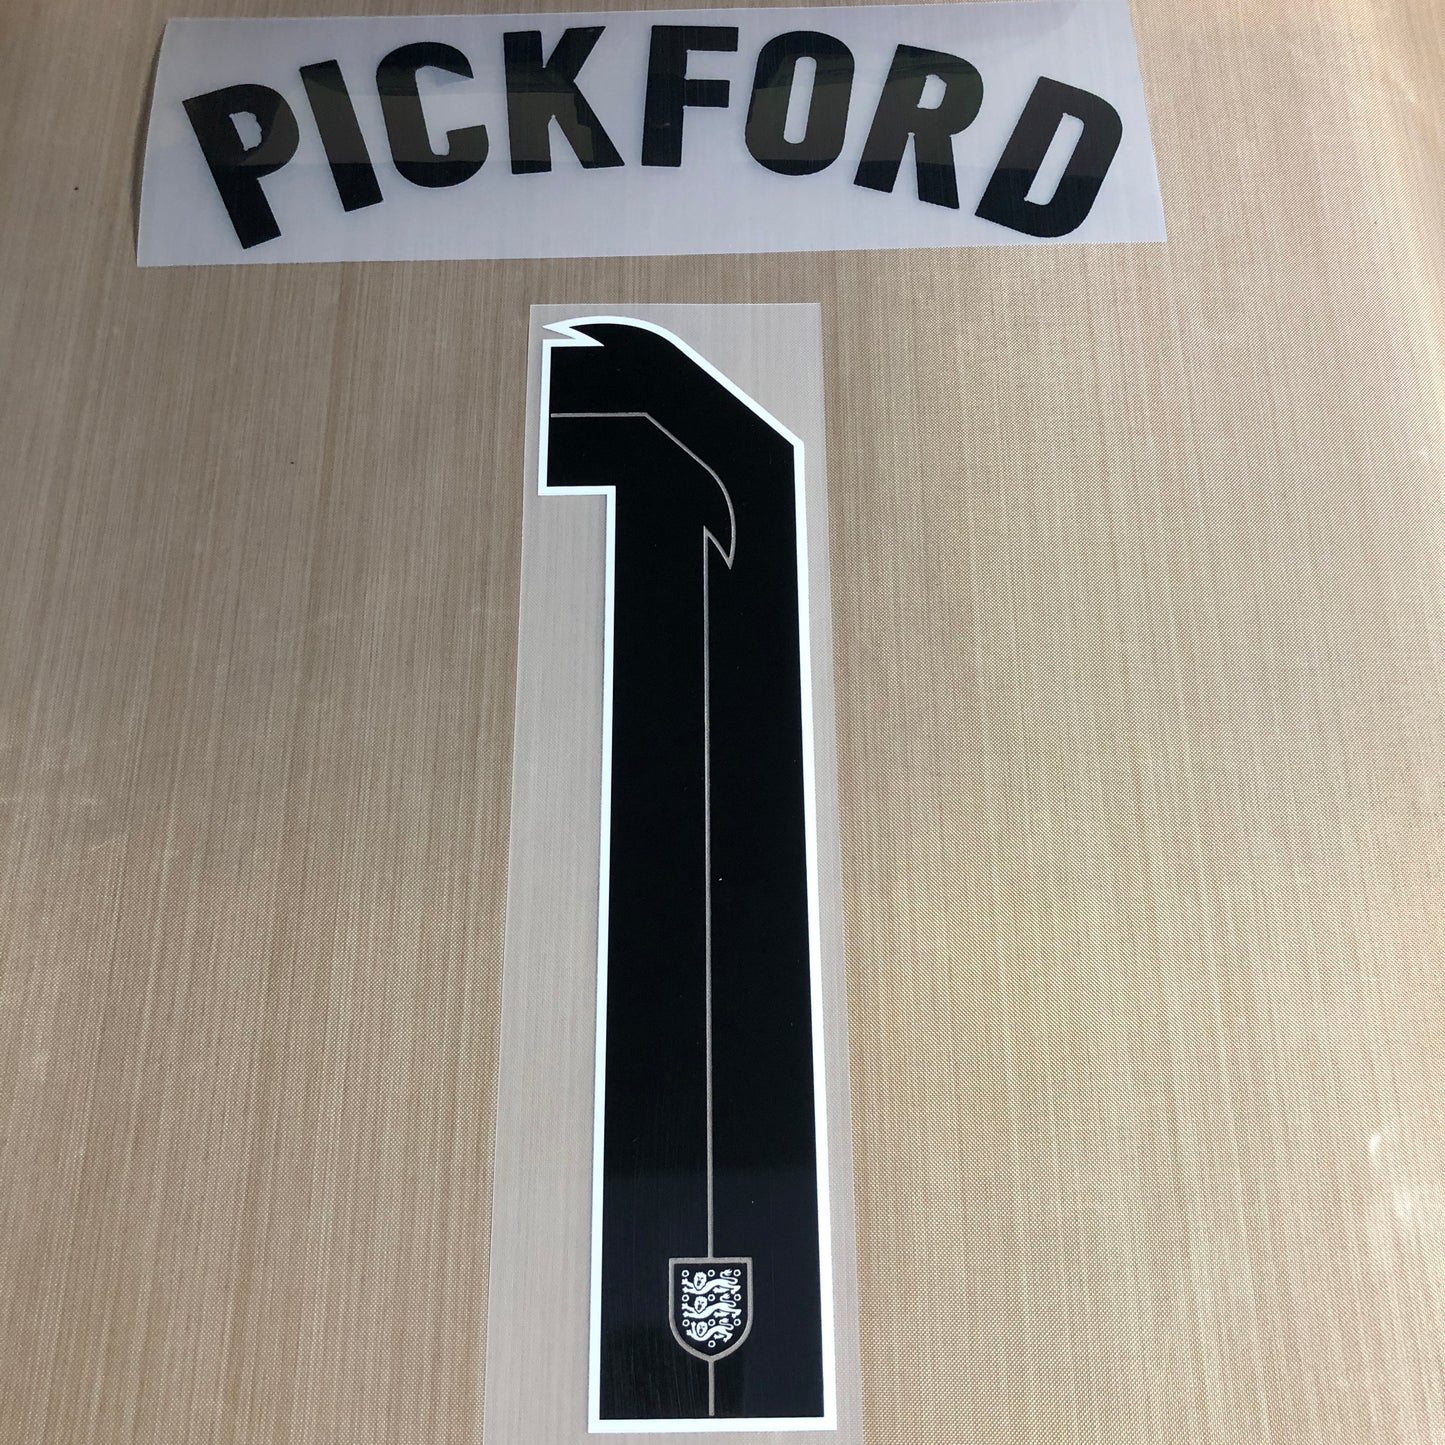 Pickford 1 England 2020 Goalkeeper Player Size Name and Number